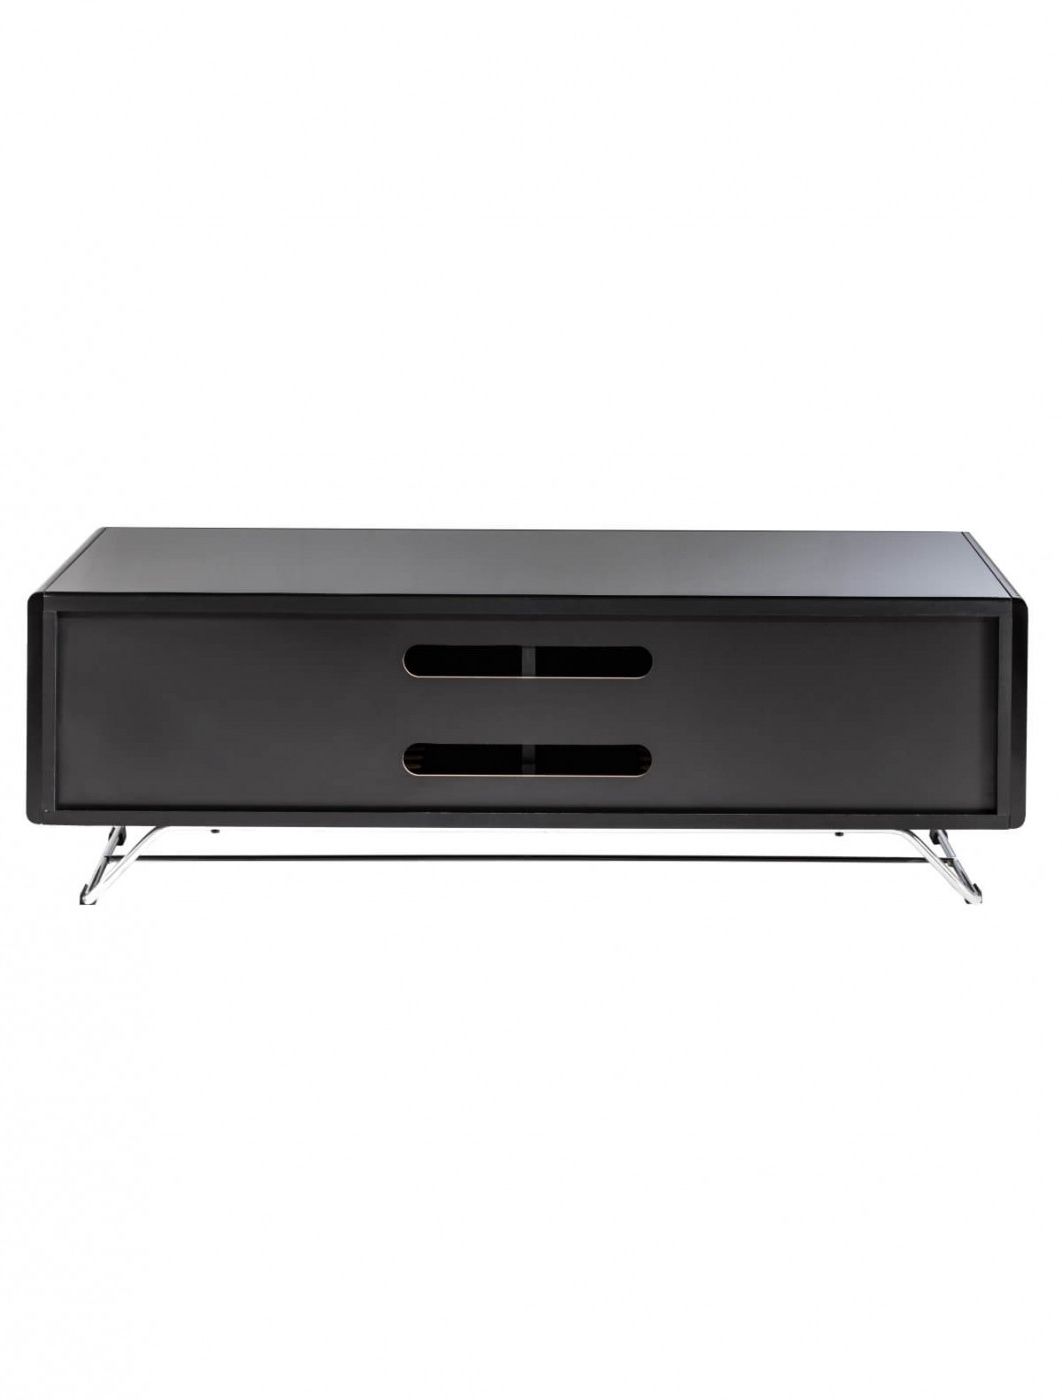 Chromium Tv Stands With Regard To Well Liked Tv Stand Black Chromium Concept 1200mm Cro2 1200cpt Bk (View 23 of 25)